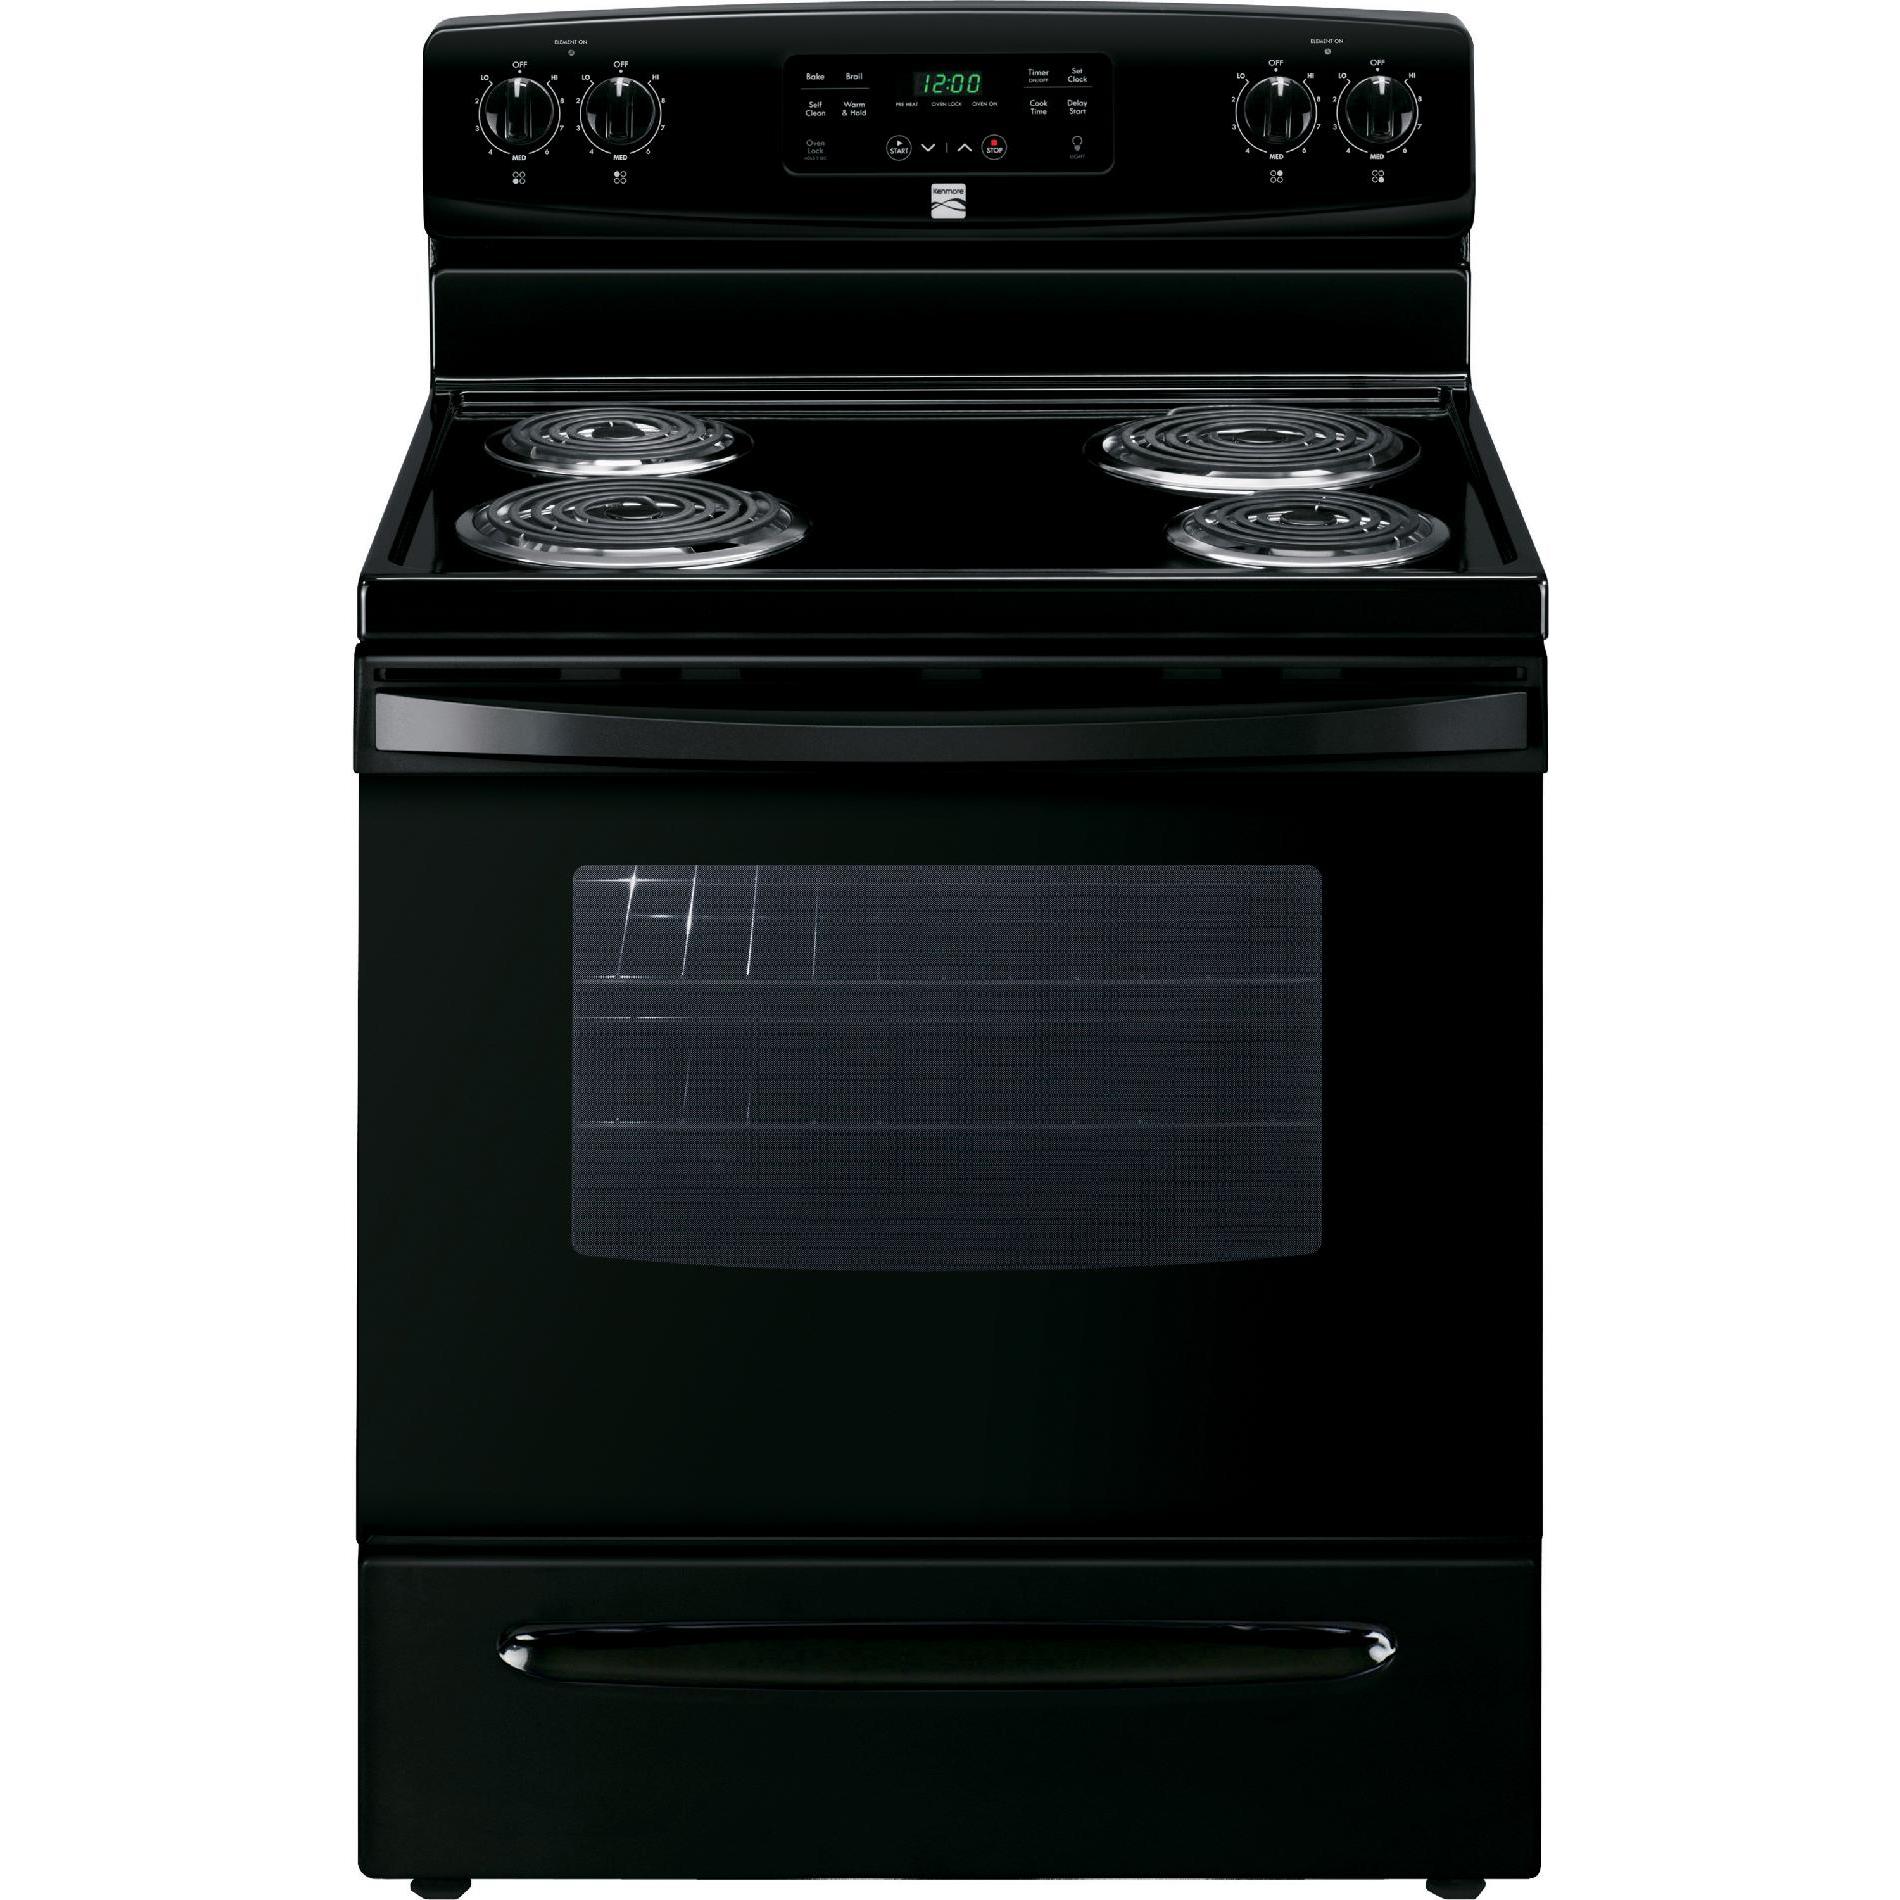 0012505508073 - 94149 5.3 CU. FT. ELECTRIC RANGE W/ SELF-CLEANING OVEN - BLACK